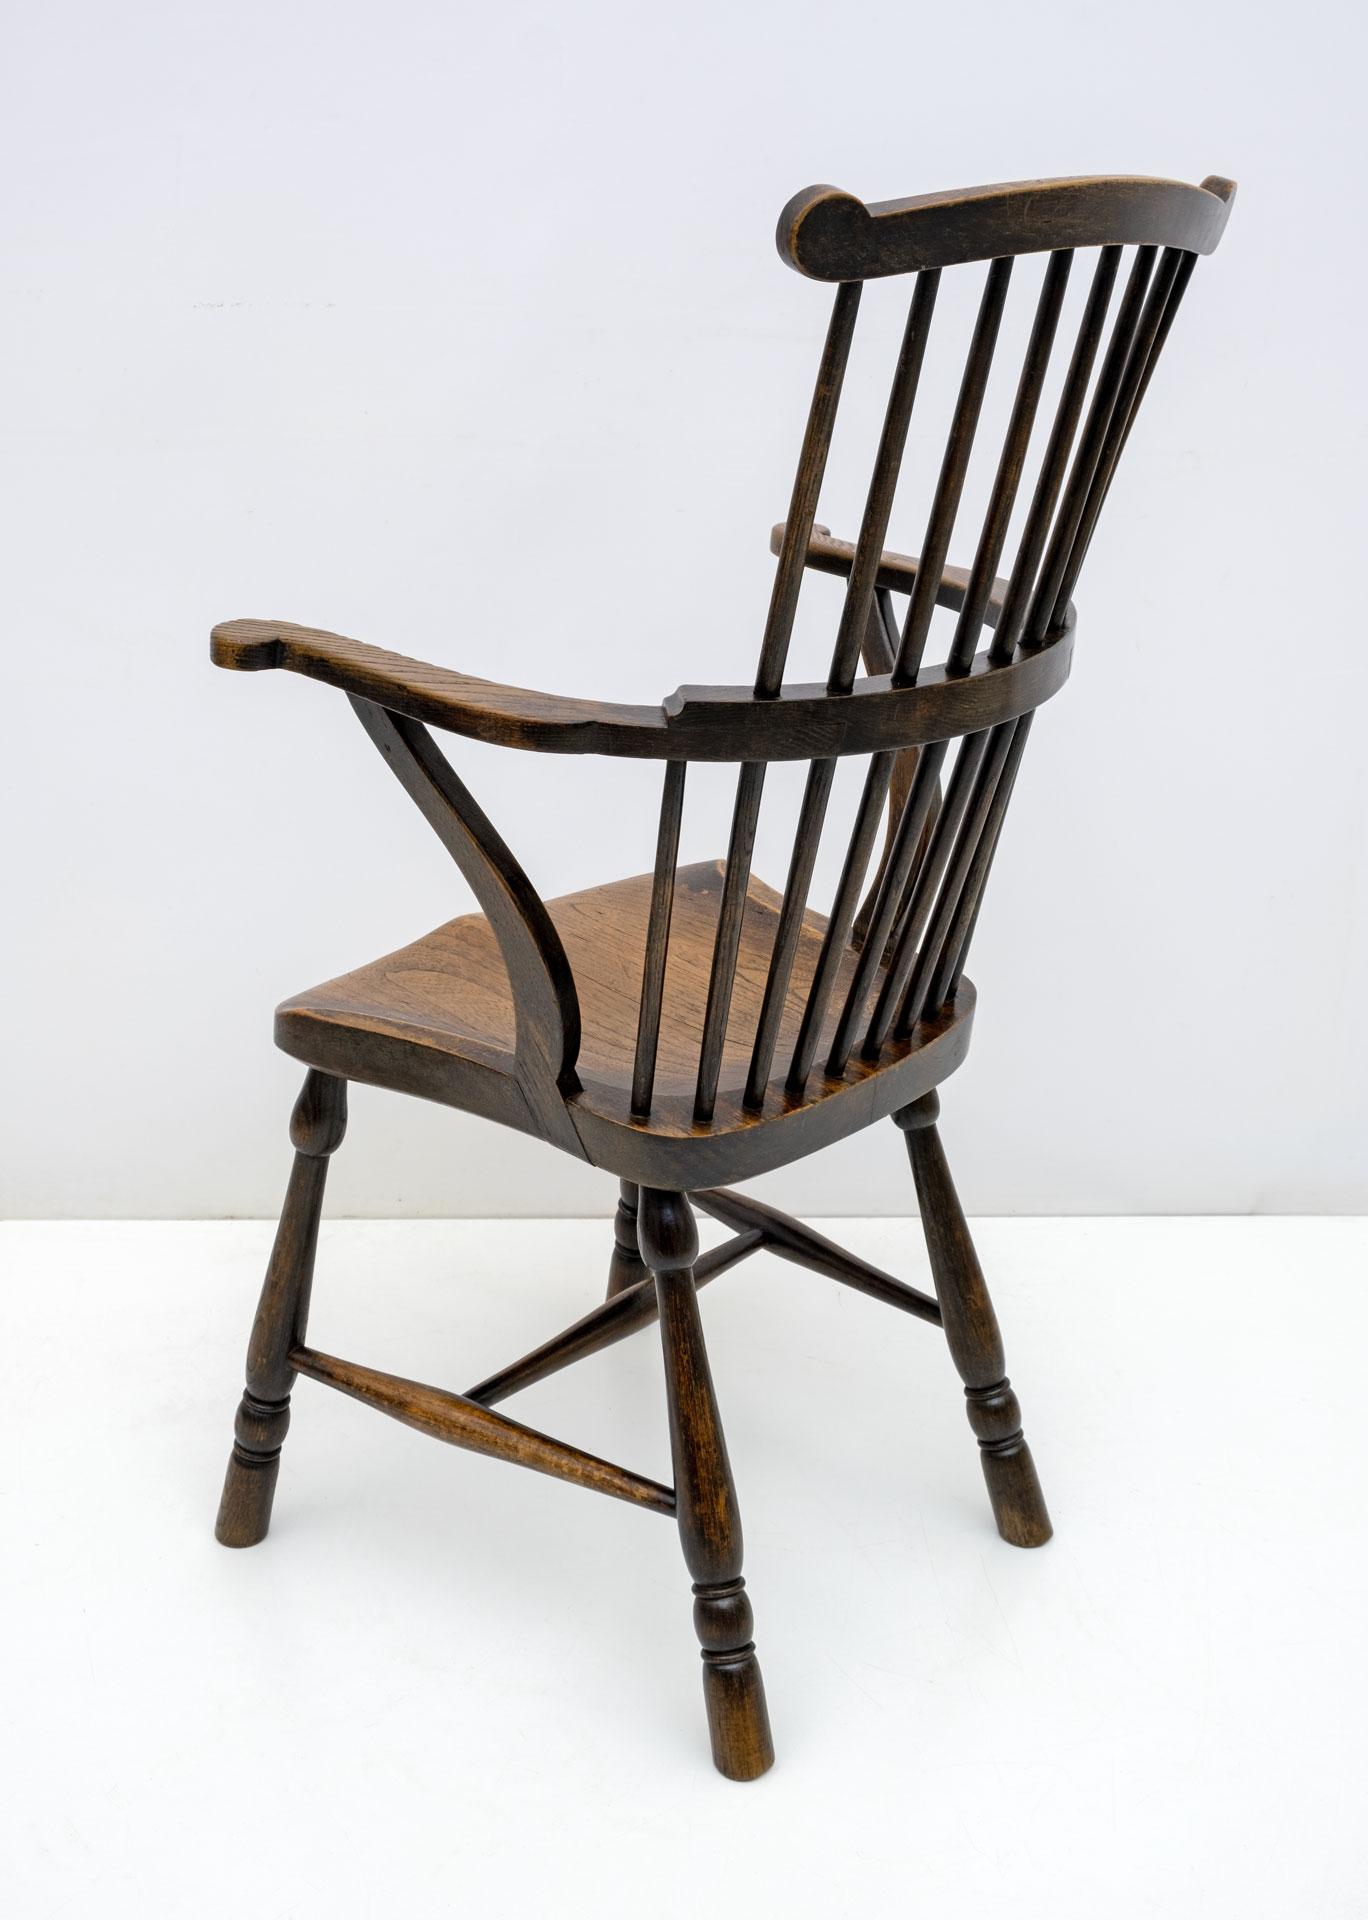 A beautiful 19th century English ash and oak scallop-back Windsor chair with outward facing arms supported by inverted stretchers, turned legs connected by a bentwood stretcher and a solid oak seat. The seat is a piece of wood with a nice patina and